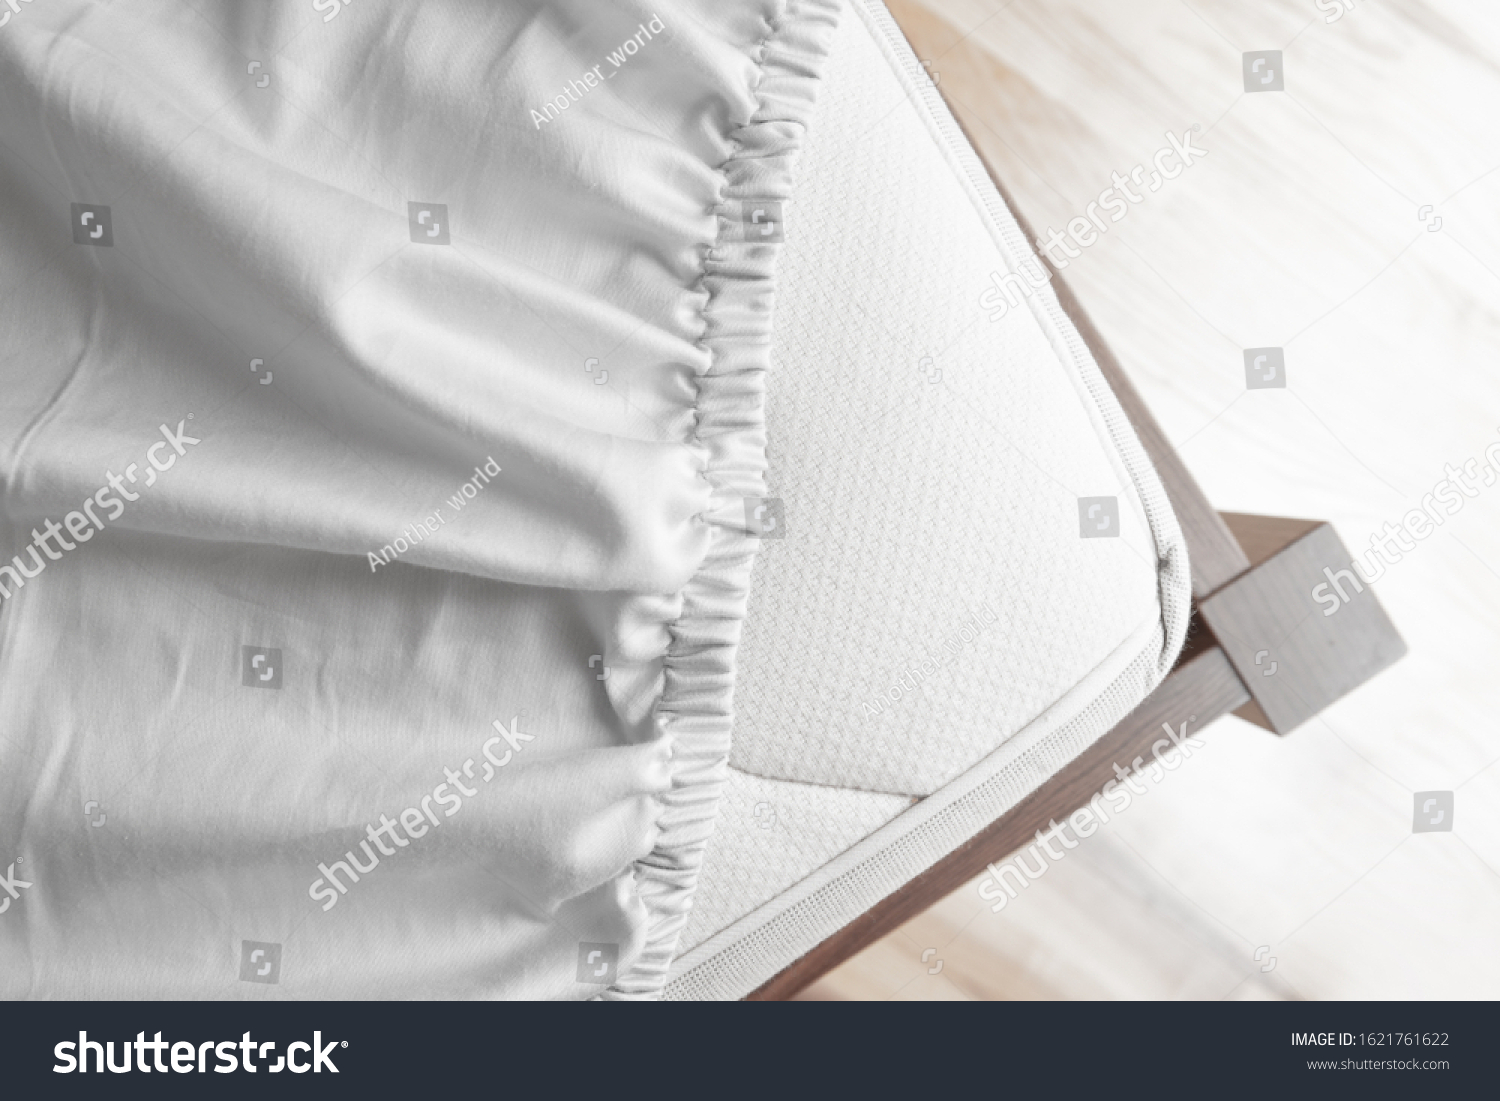 Bed corner with white fitted sheet. White sheet with elastic band. Bed cover. #1621761622